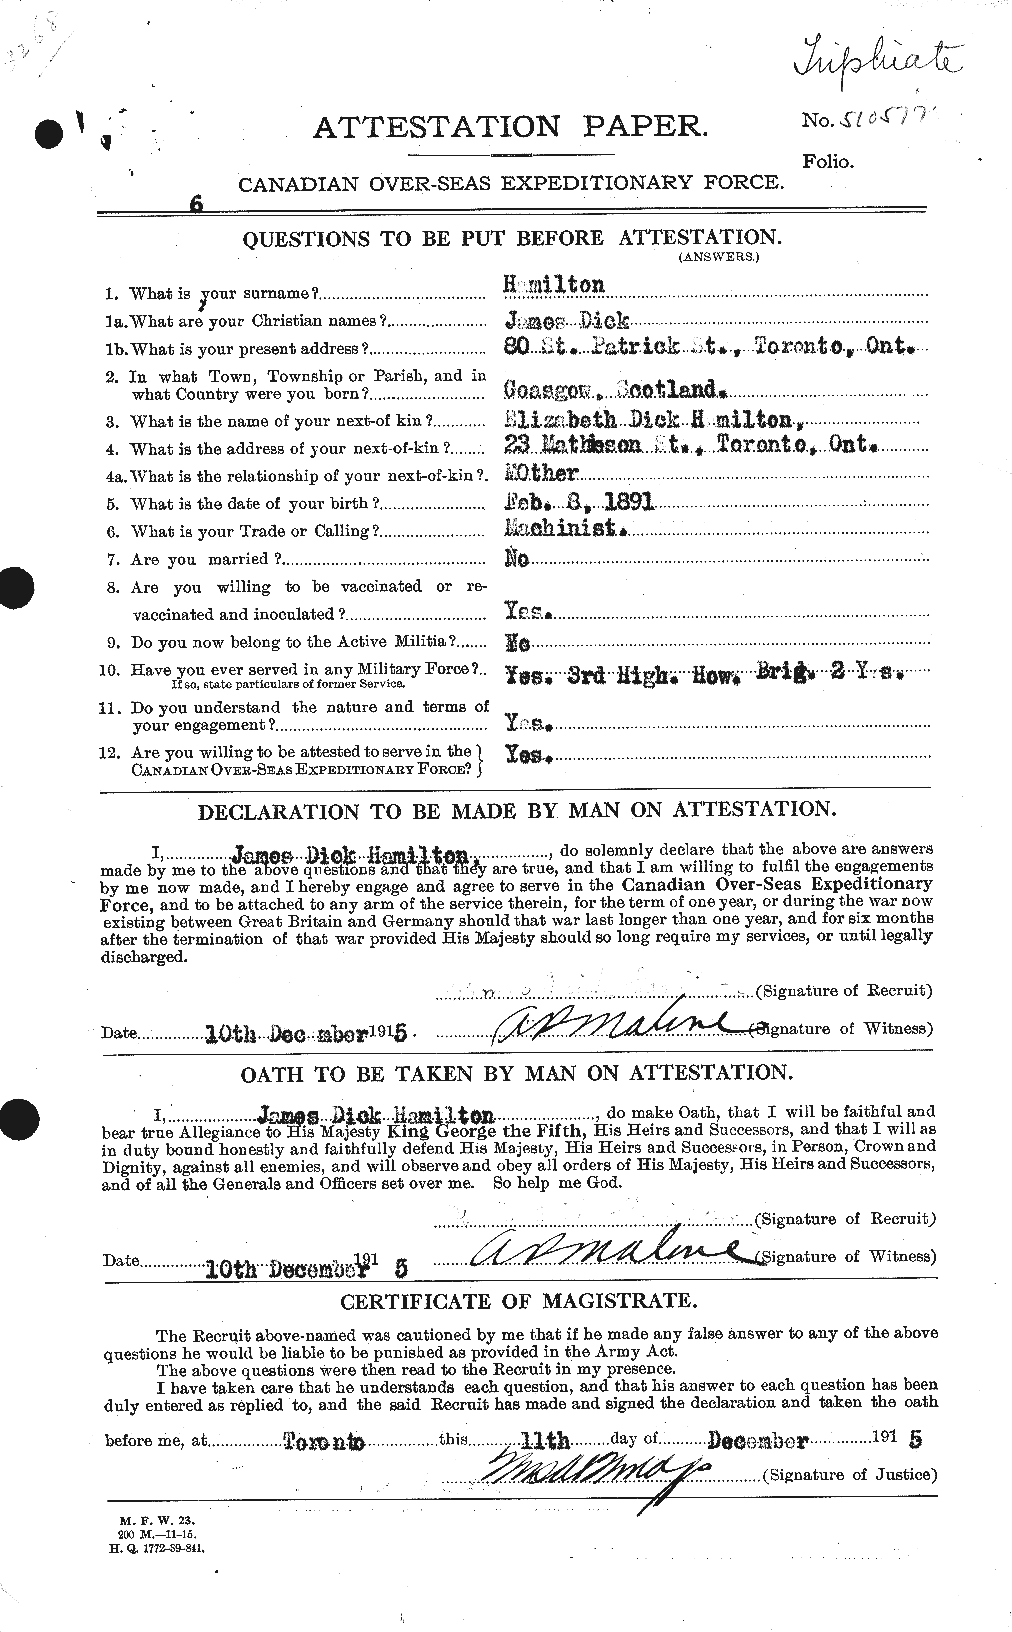 Personnel Records of the First World War - CEF 372974a